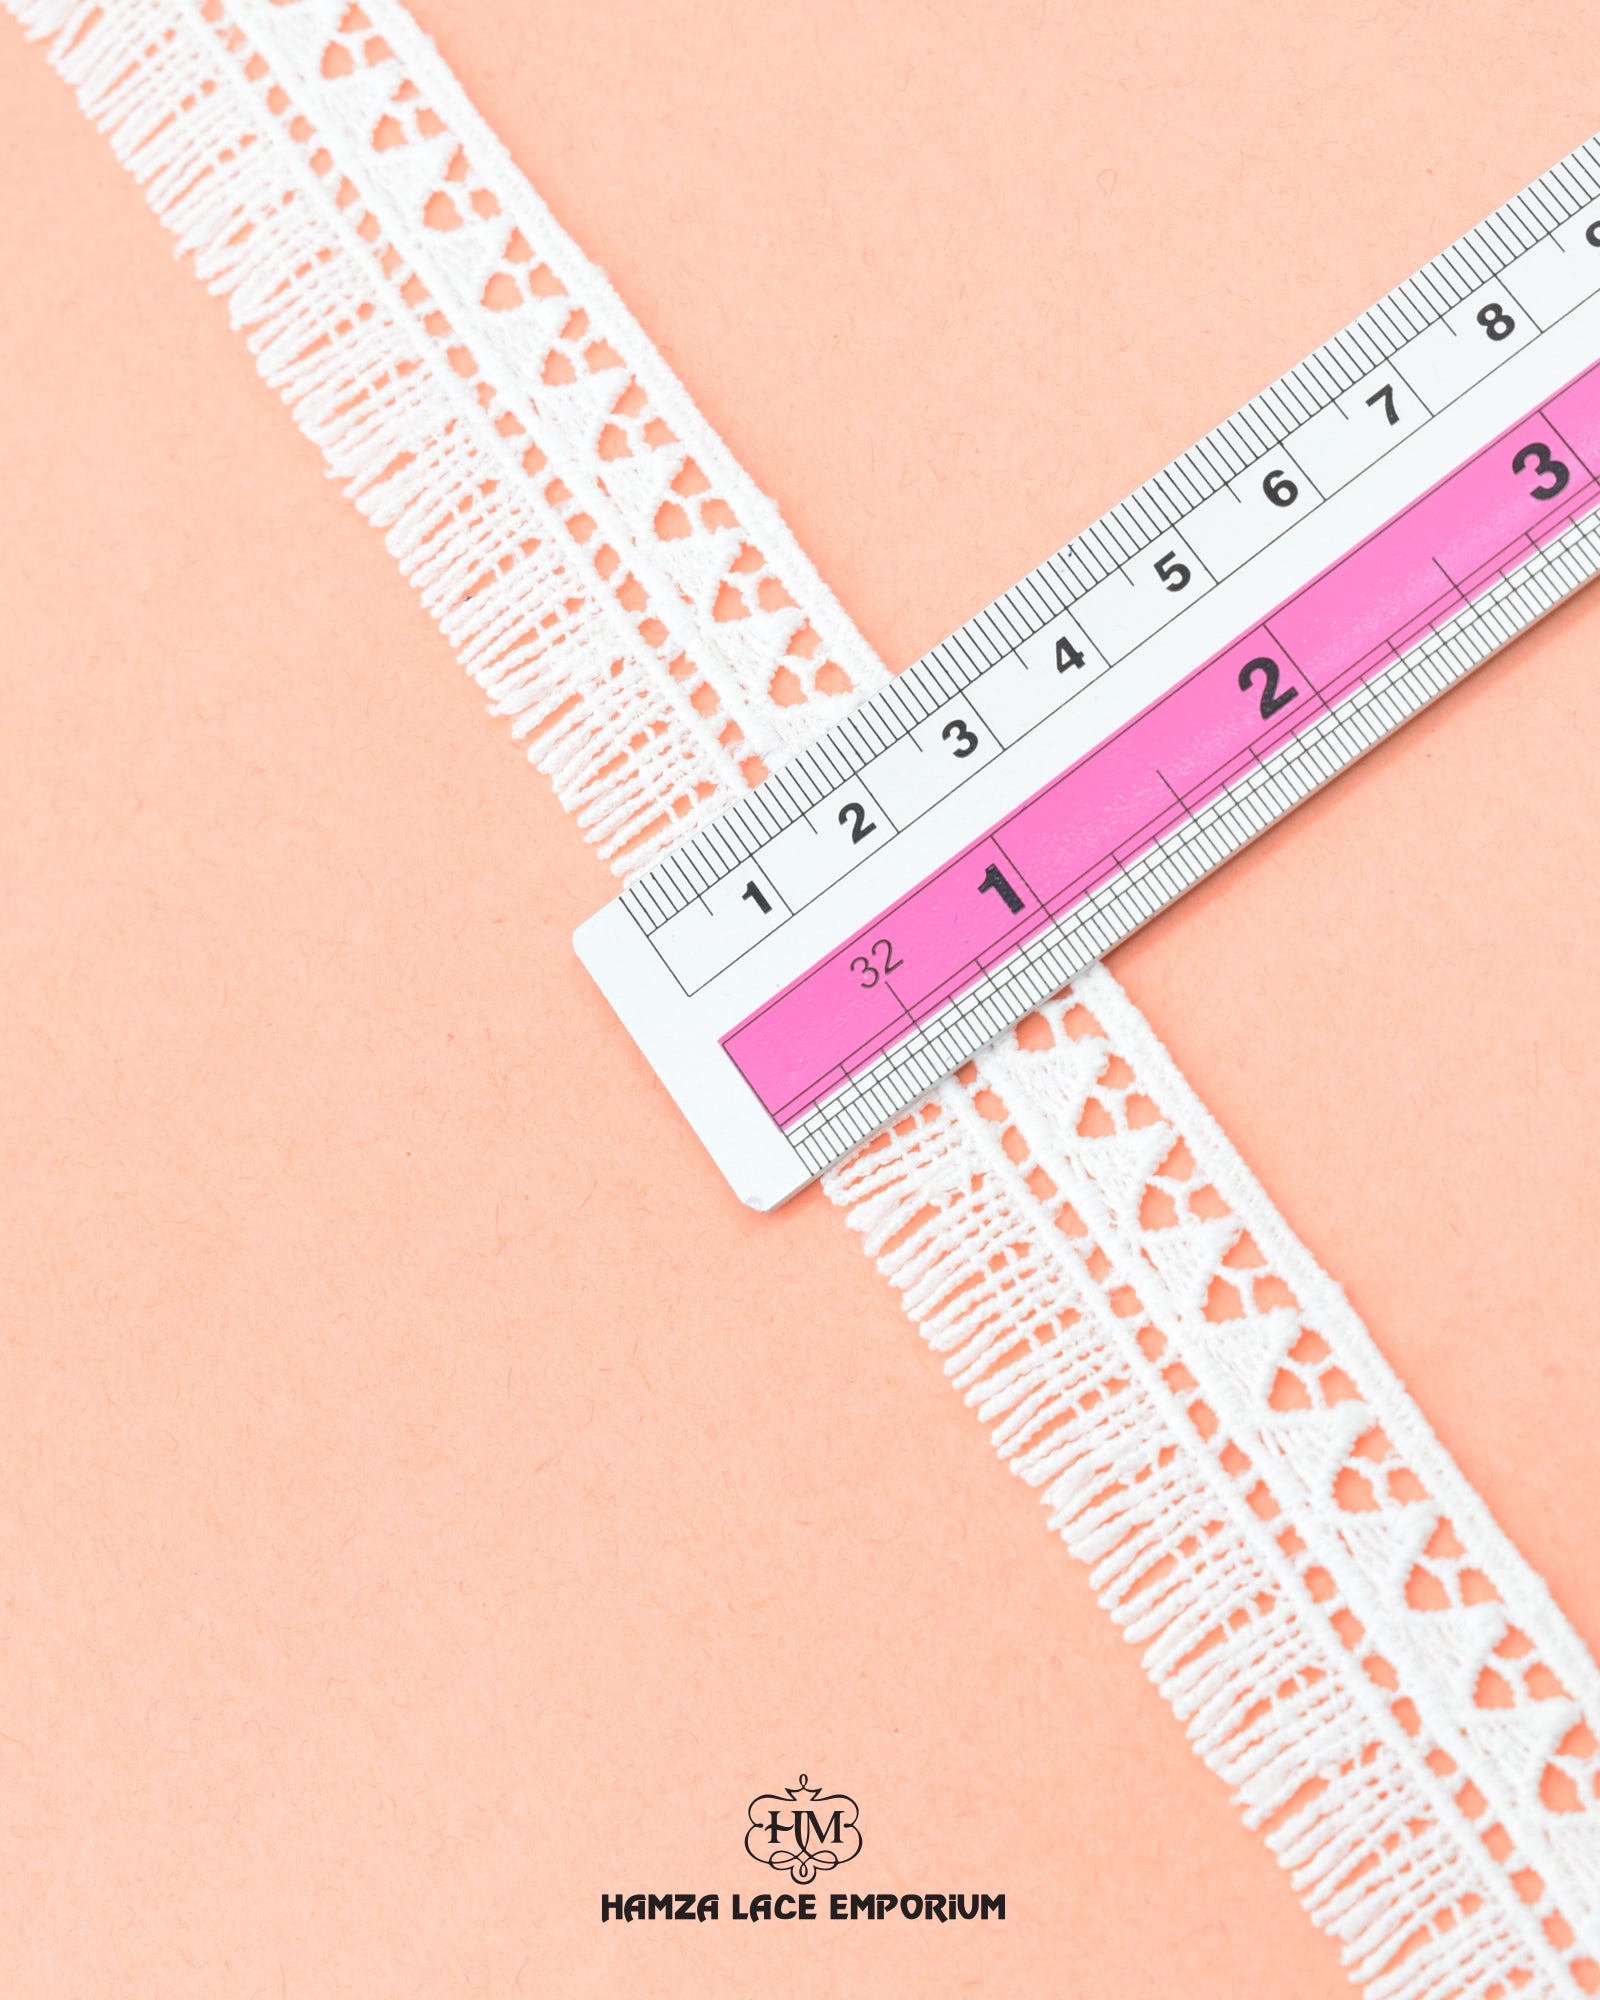 Size of the 'Edging Lace 23008' is shown as '1' inch with the help of a ruler